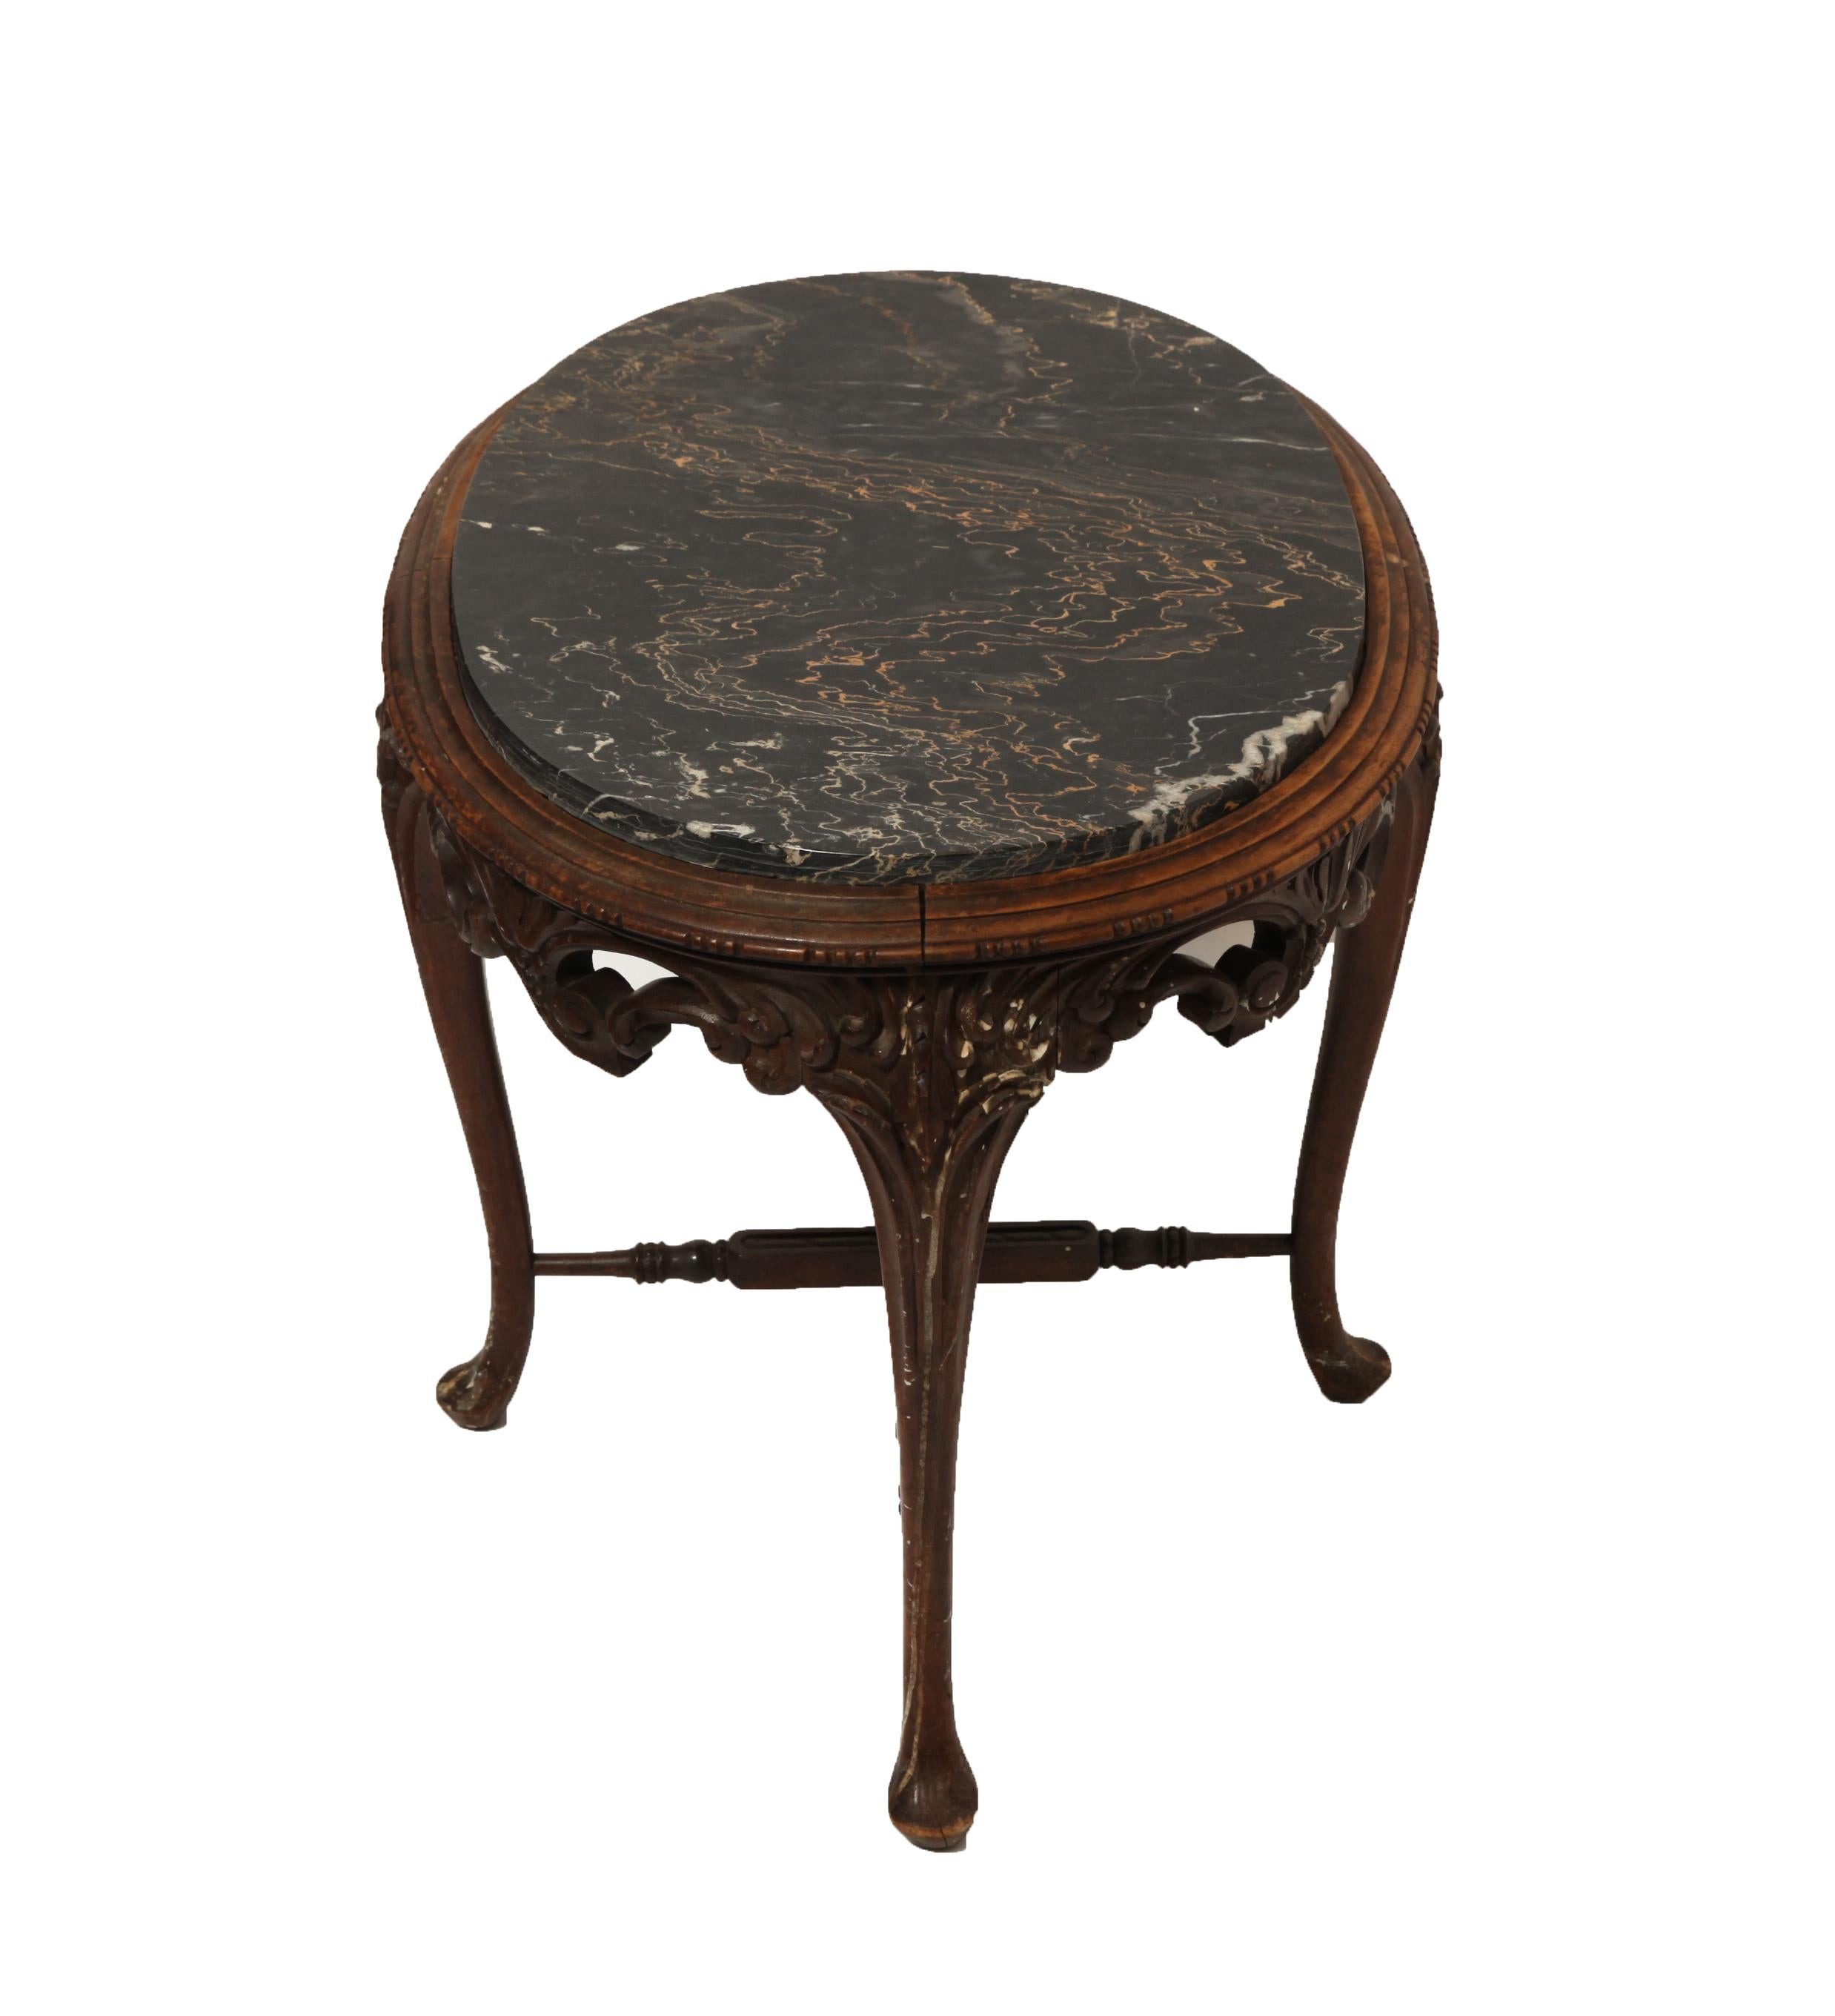 20th Century Belgian Art Nouveau Oval Carved Side Table With Marble Top